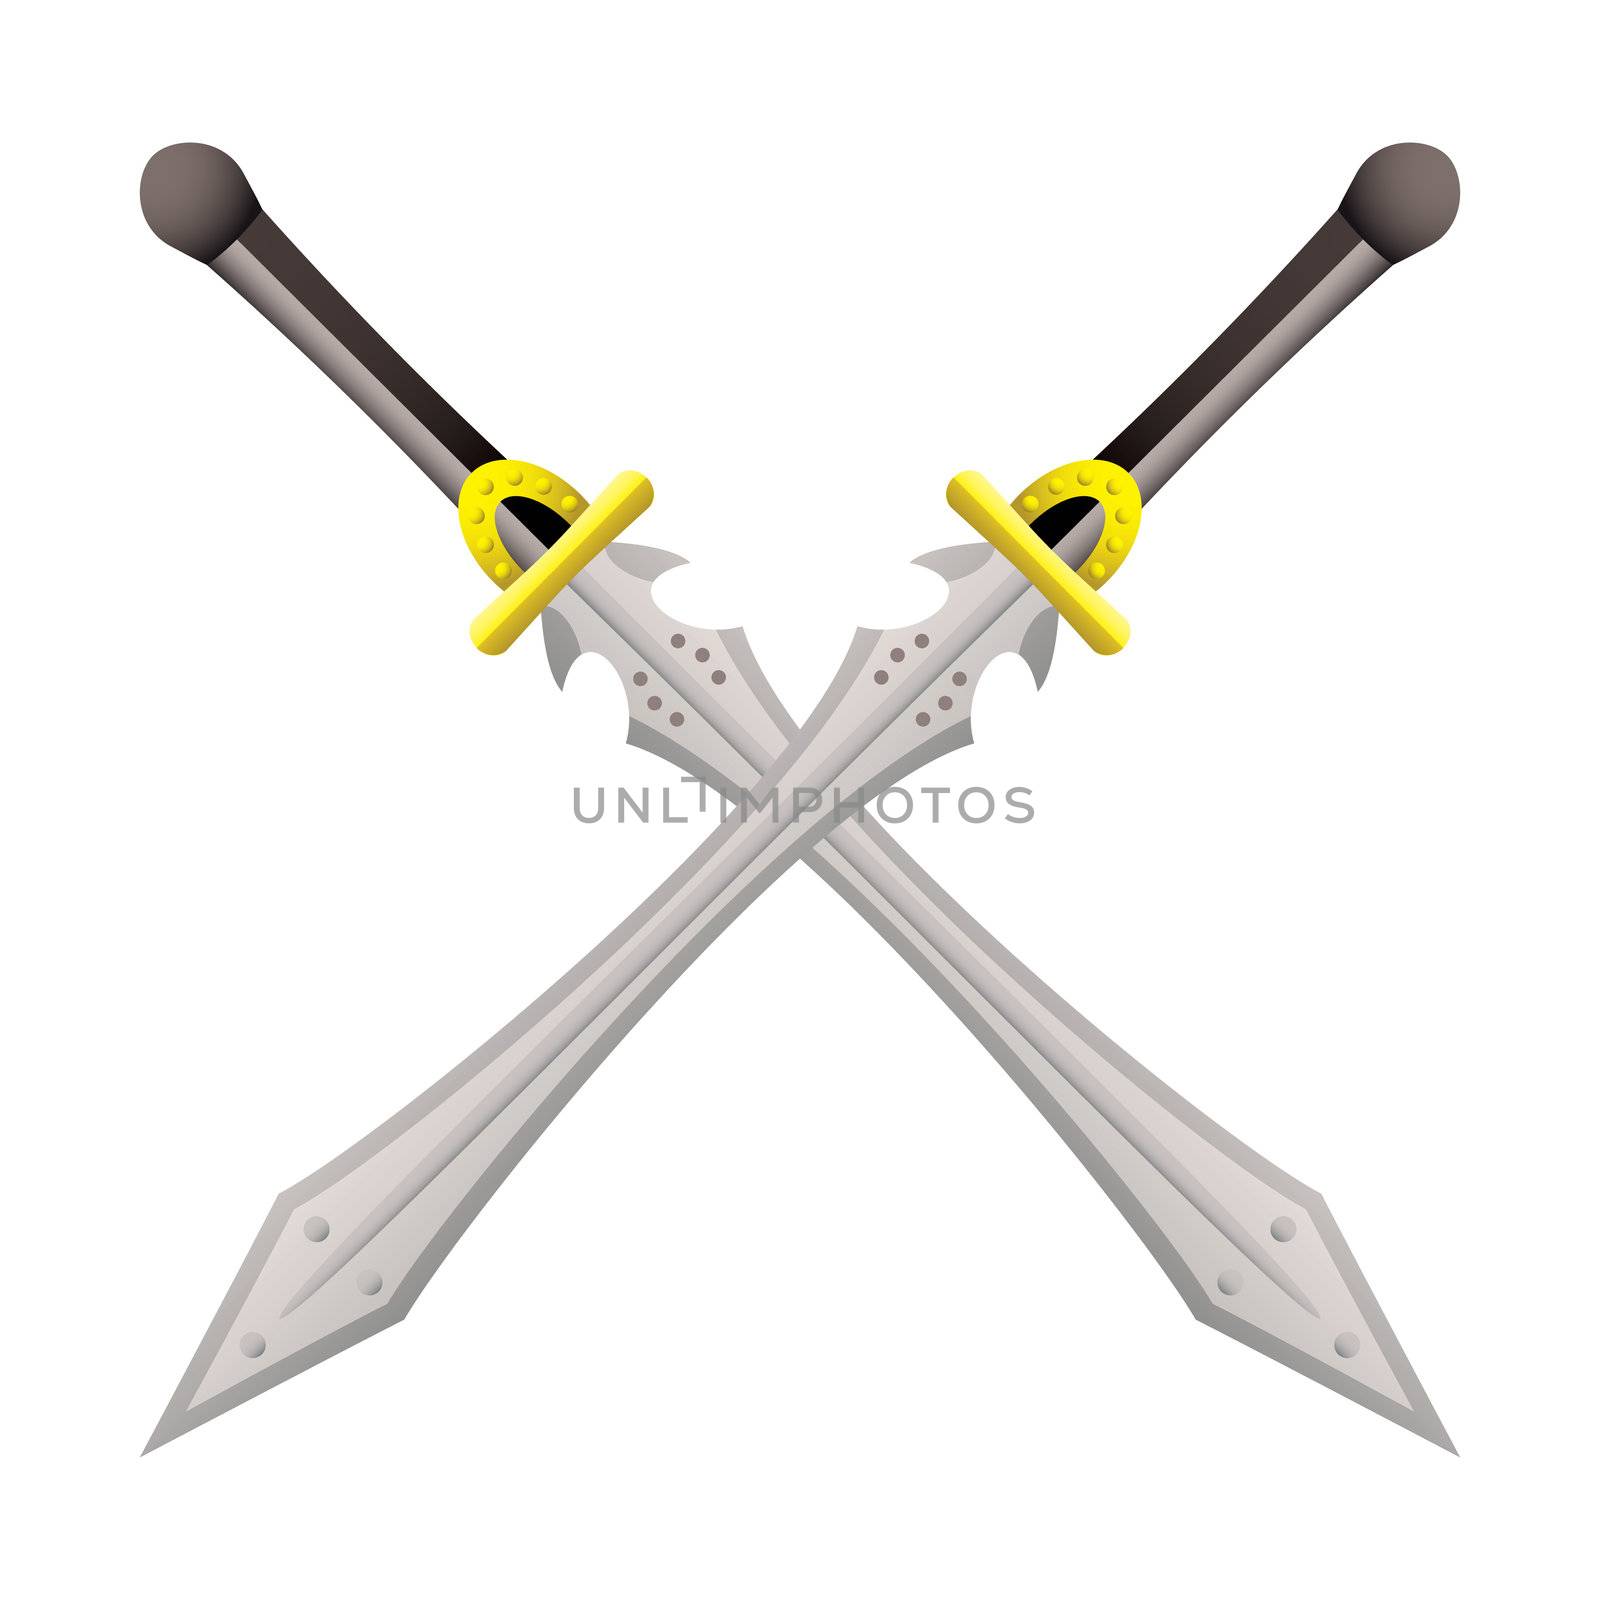 Two large swords crossed ideal for coat of arms